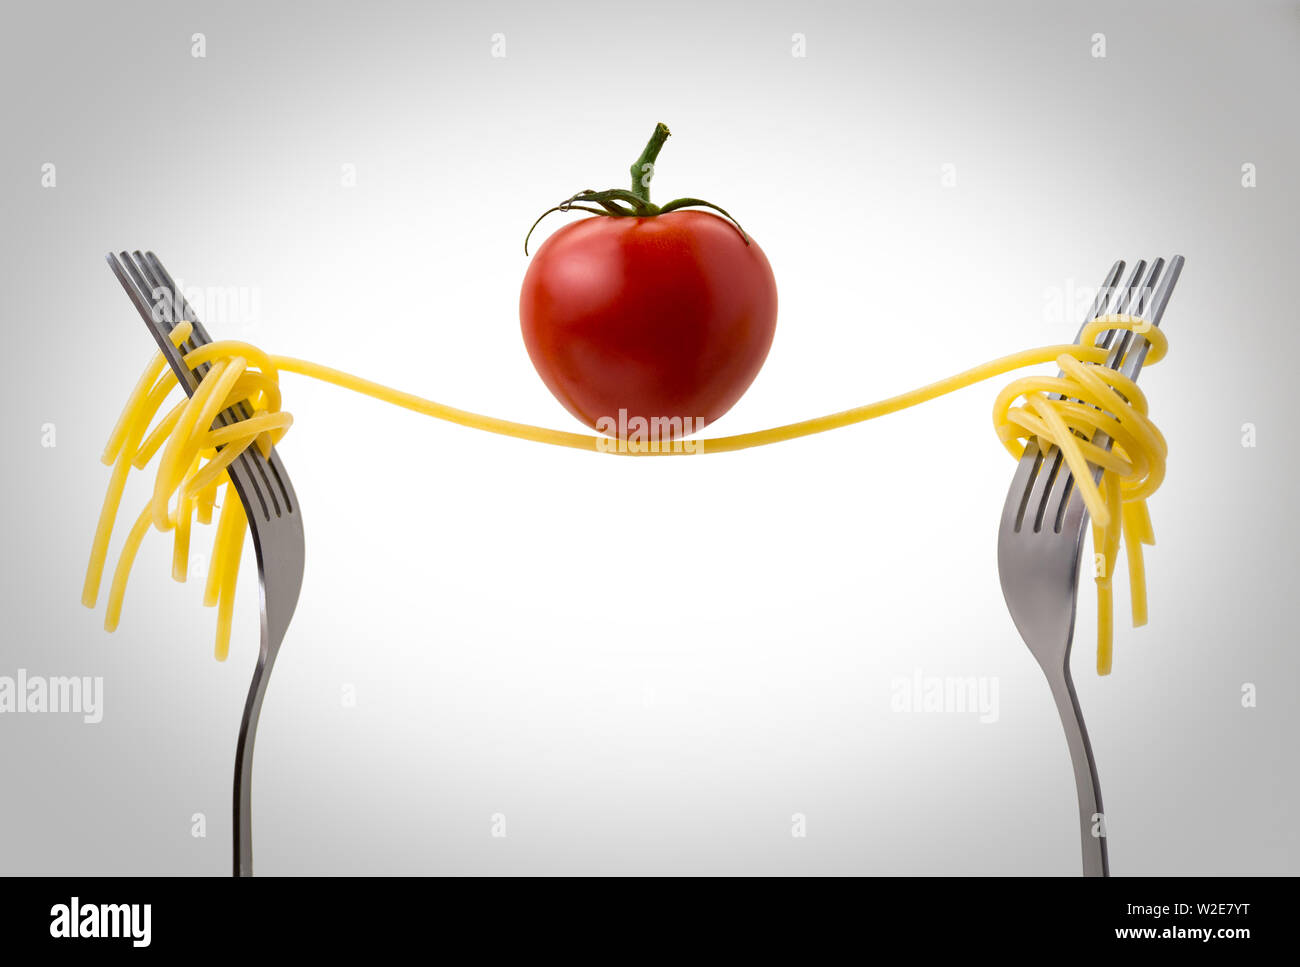 spaghetti between two forks with a tomato above on a white background, abstract photo Stock Photo